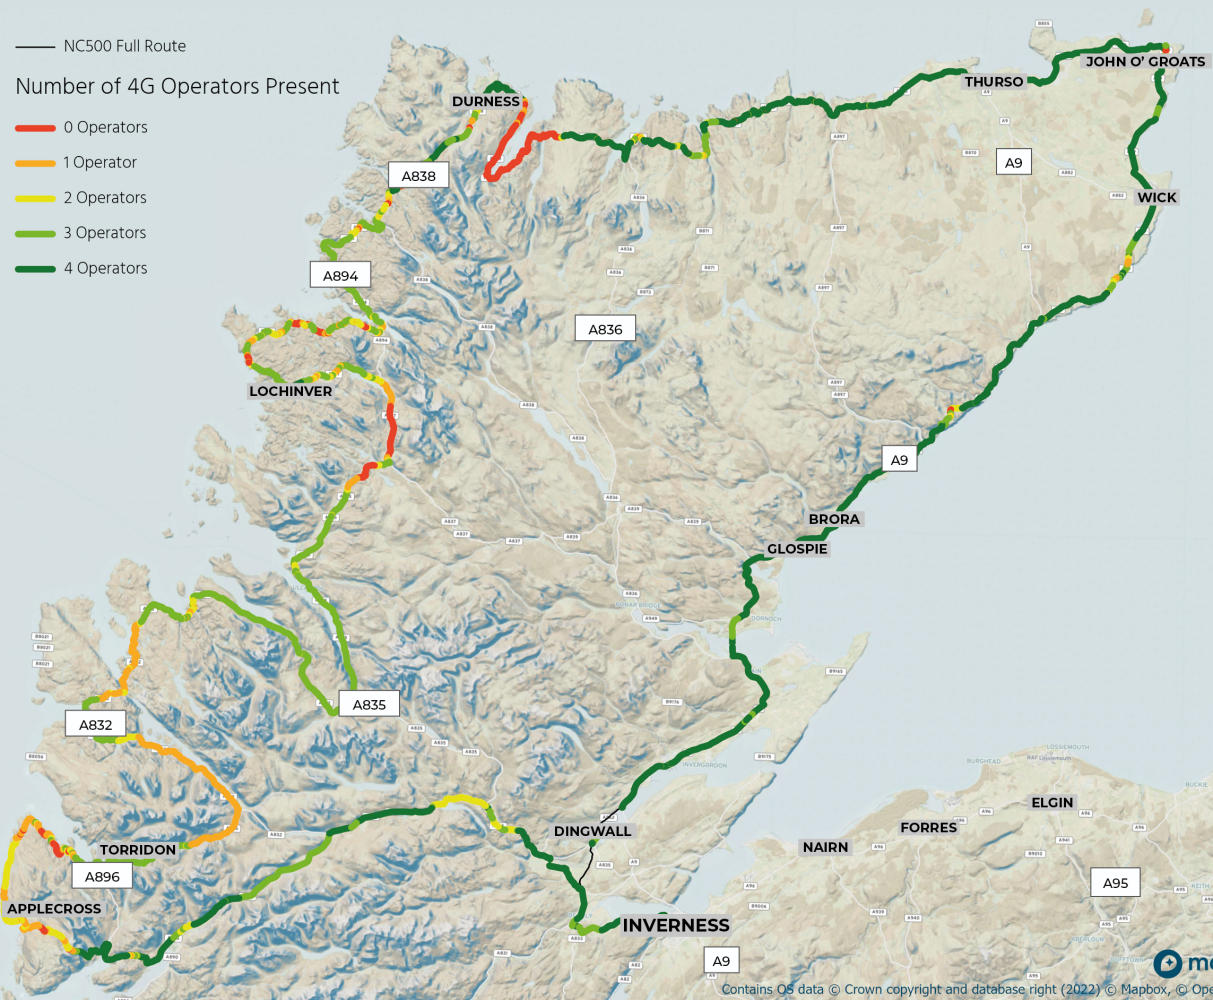 FarrPoint Map 4G Mobile Cover on Scotland's North Coast 500 Road ...